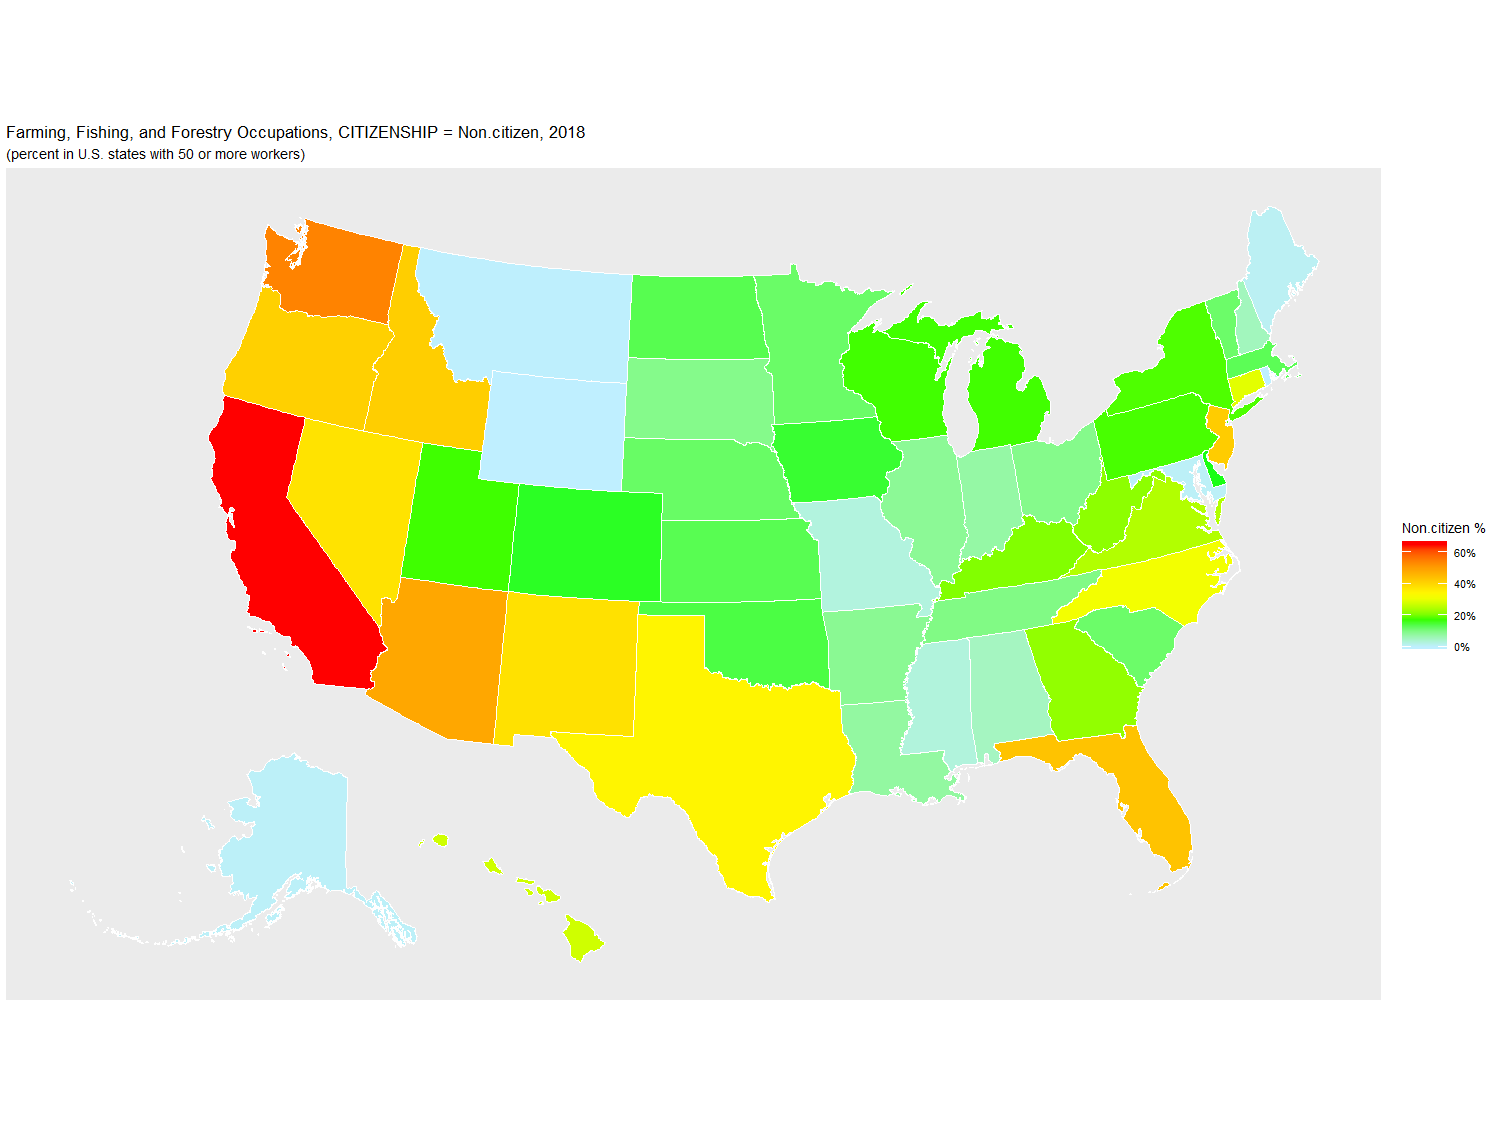 Non-citizen Percentage of Farming, Fishing, and Forestry Occupations by U.S. State, 2018